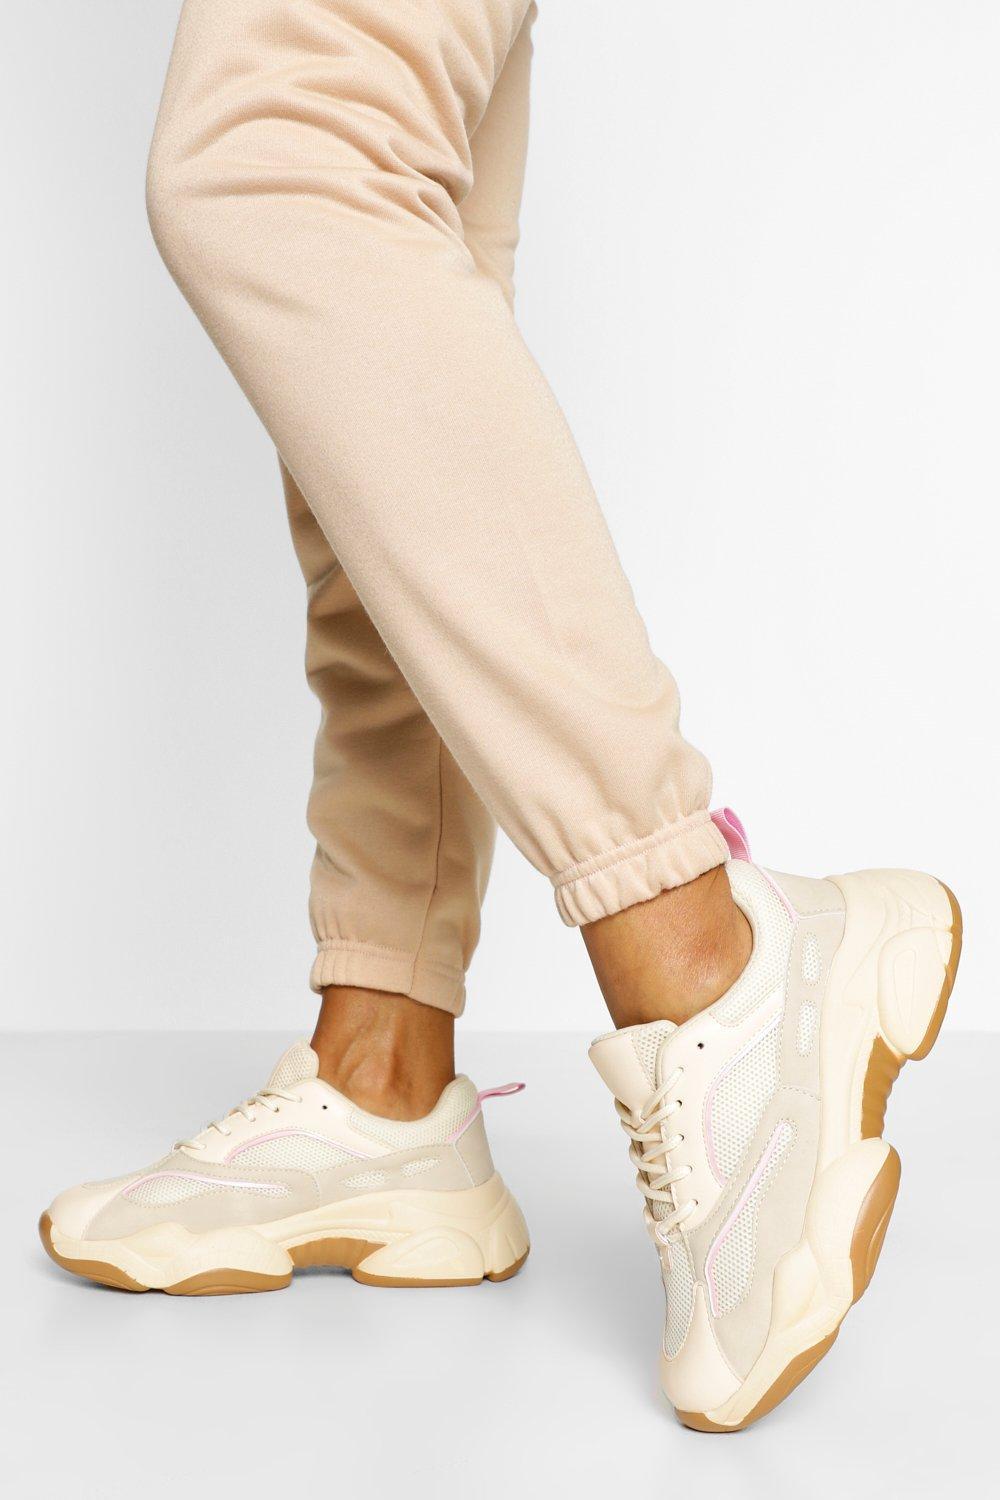 Boohoo Contrast Piping Chunky Sneakers in Beige (Natural) - Lyst